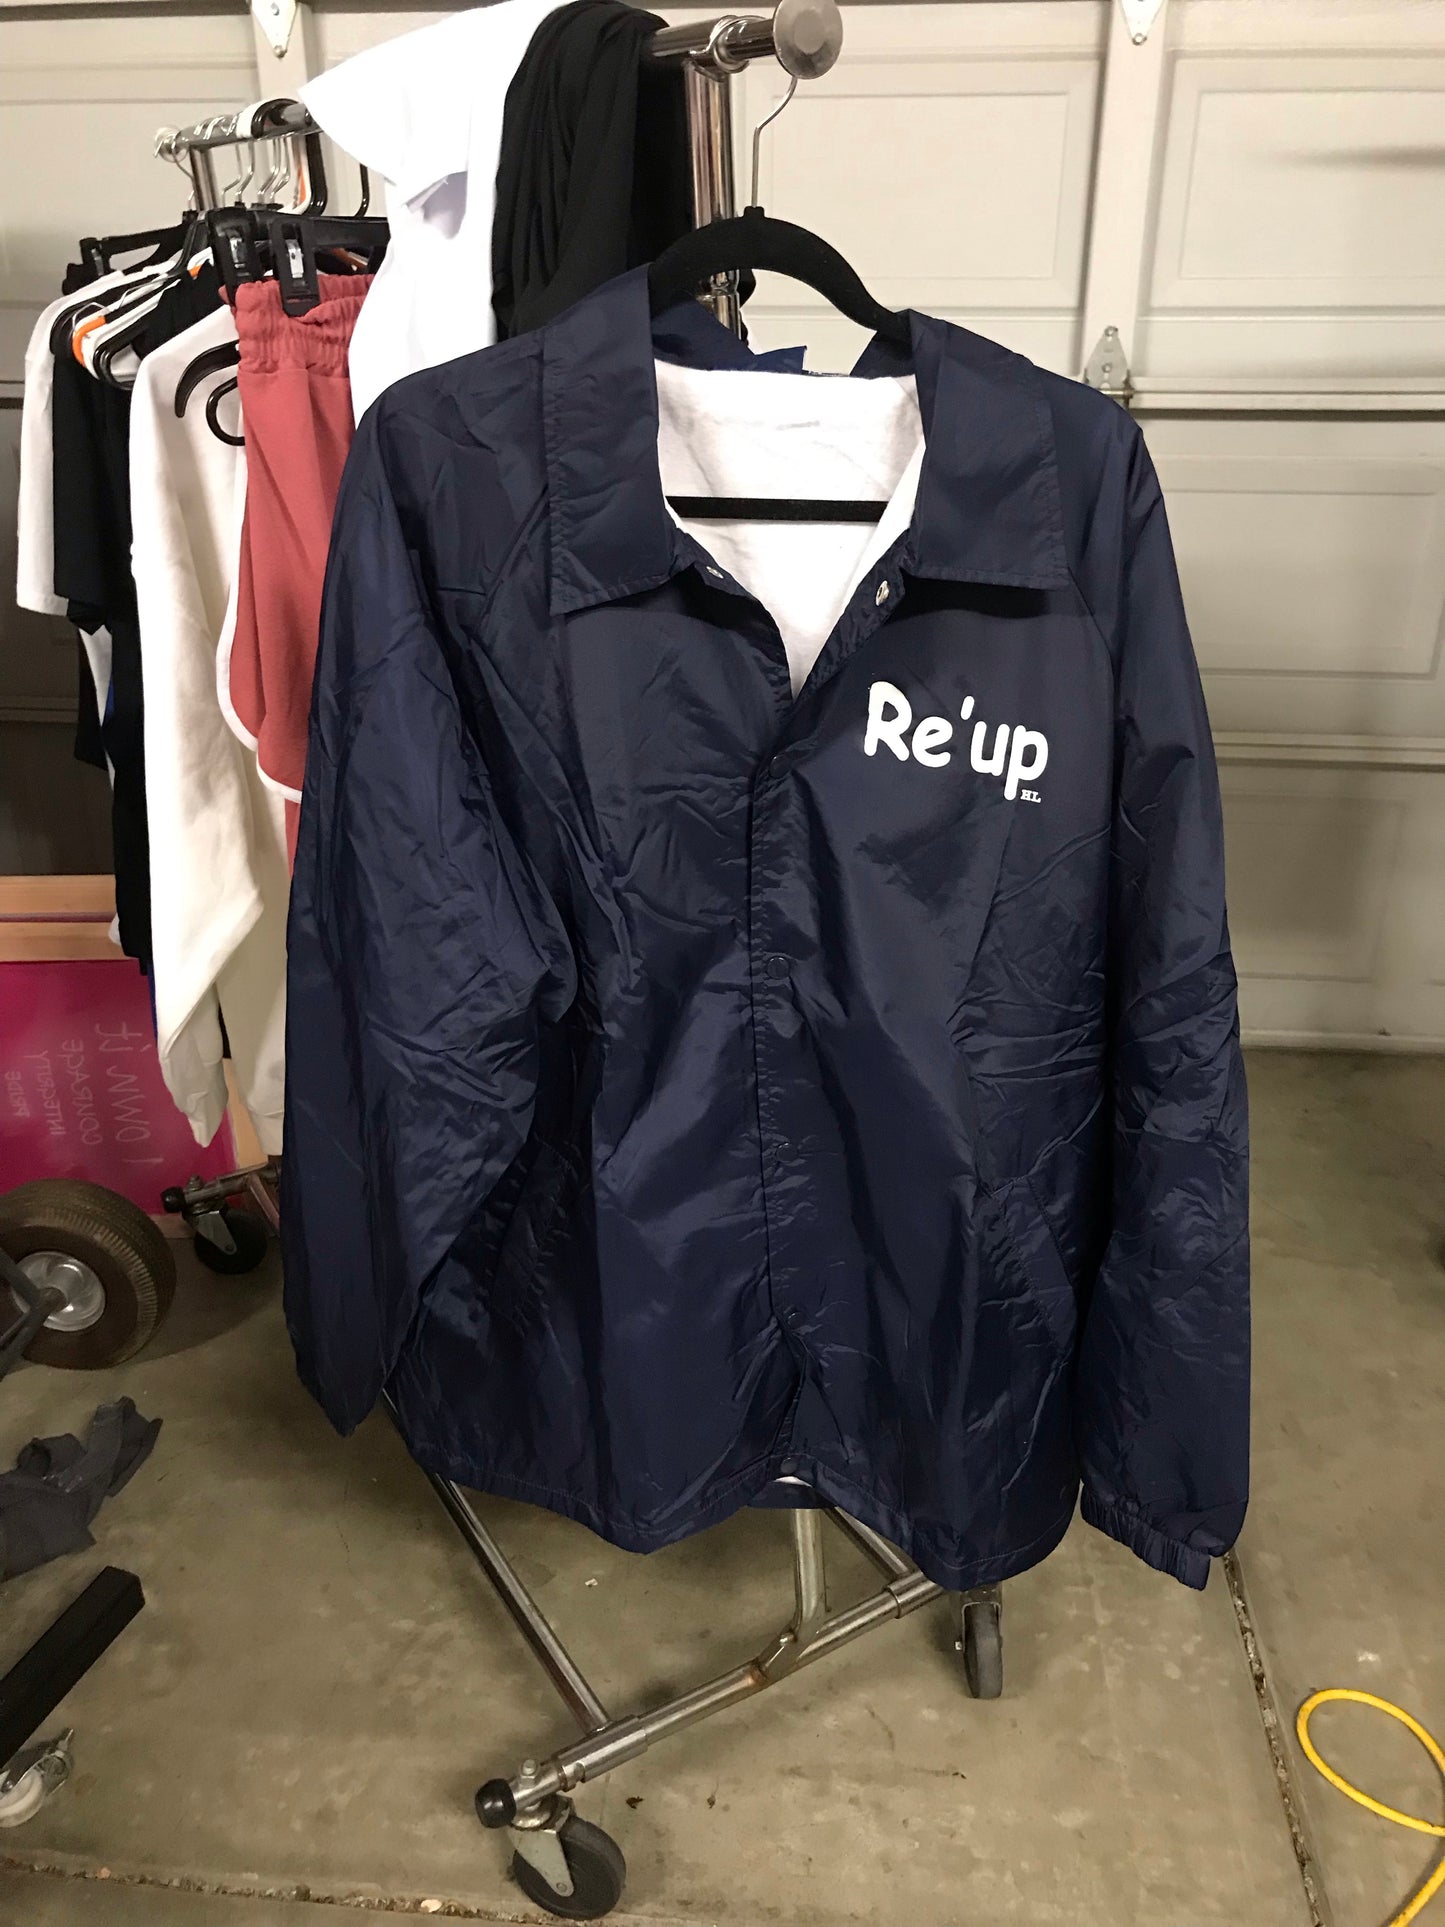 Re’up jackets